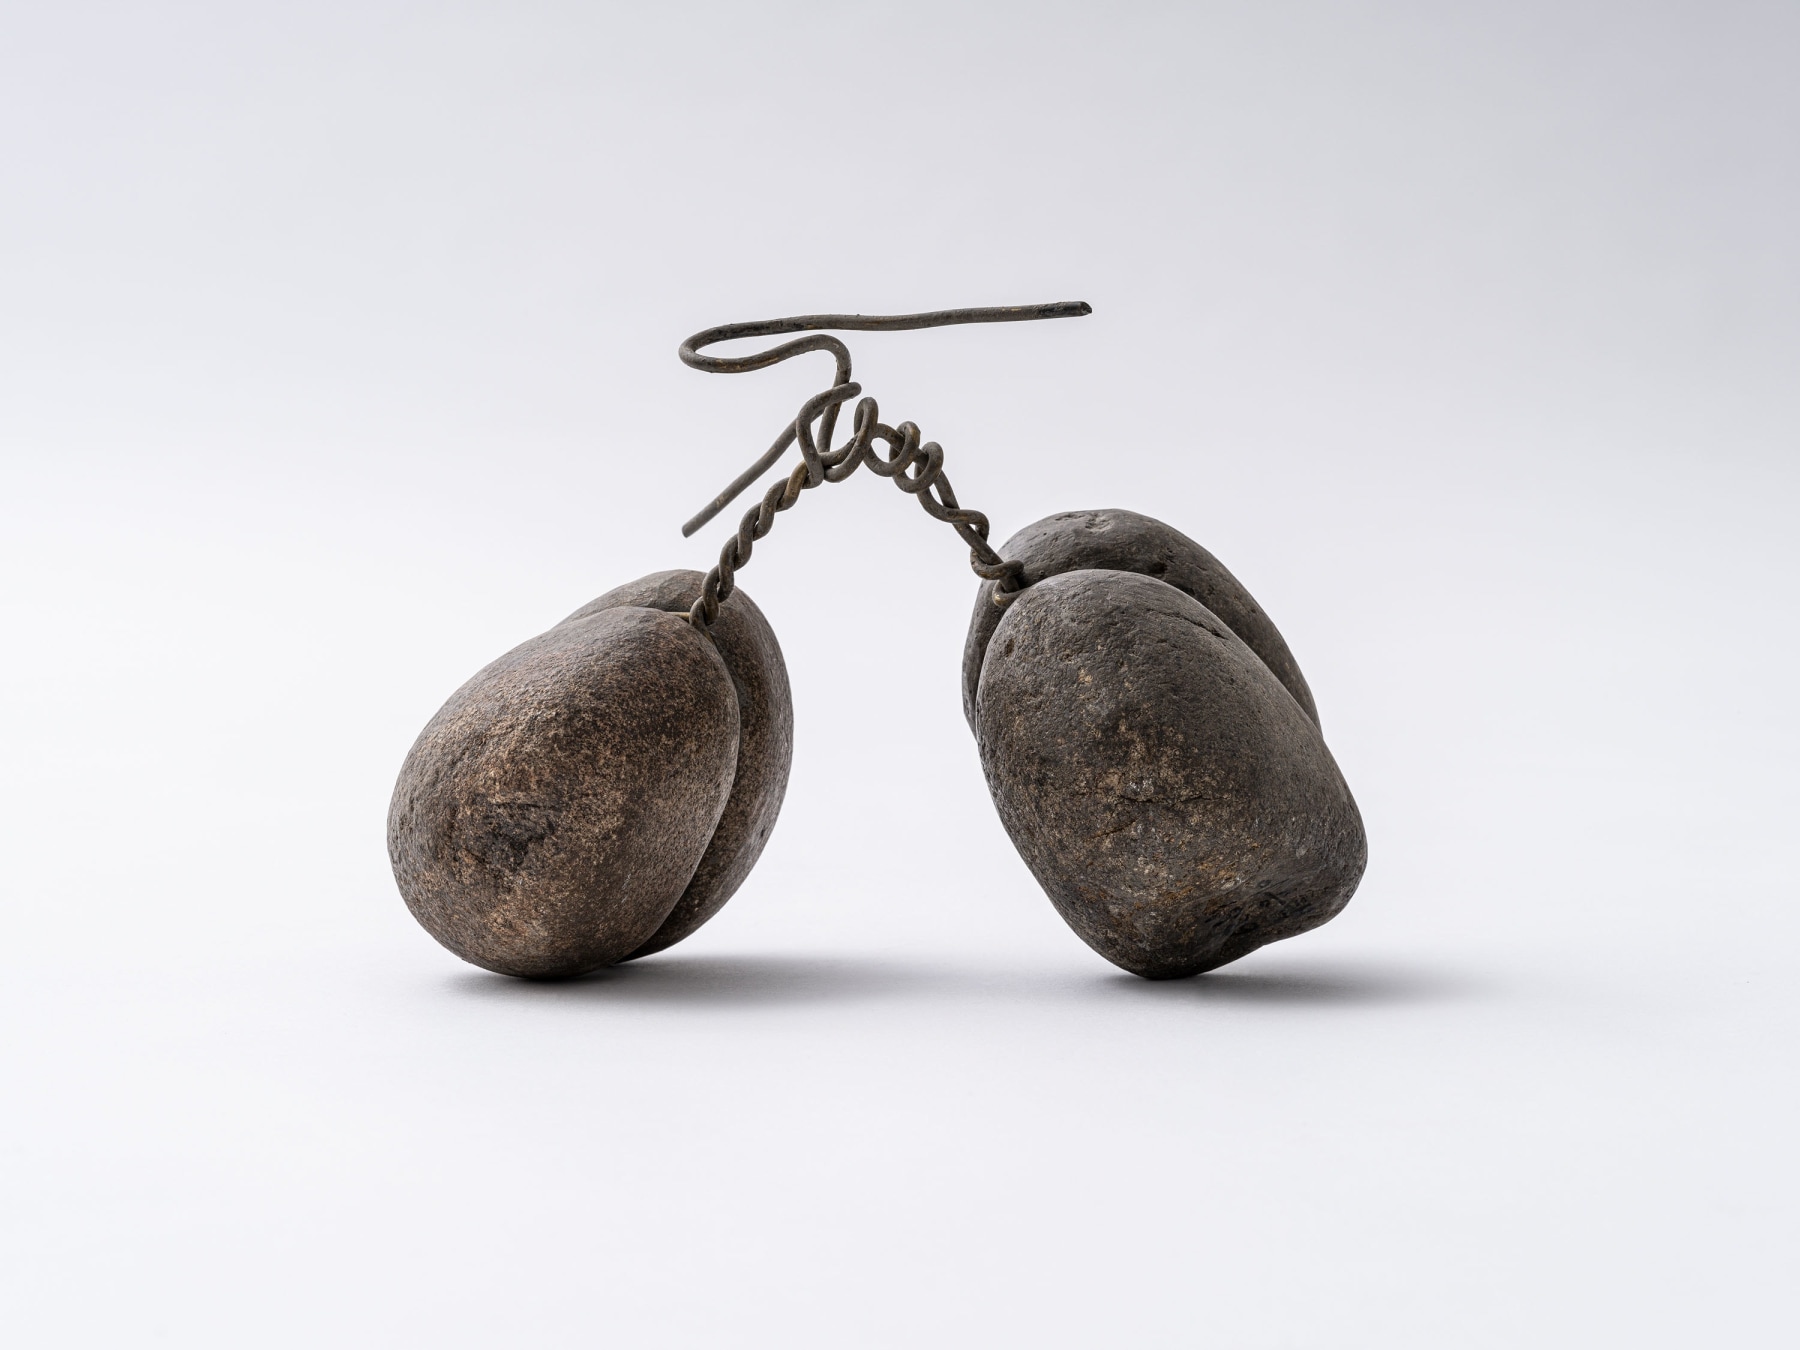 Seung-taek Lee

&amp;ldquo;Tied Stone&amp;rdquo;, 1989

Stone, wire

8 1/4 x 10 1/2 x 6 1/2 inches

21 x 27 x 16.5 cm

LEE 38